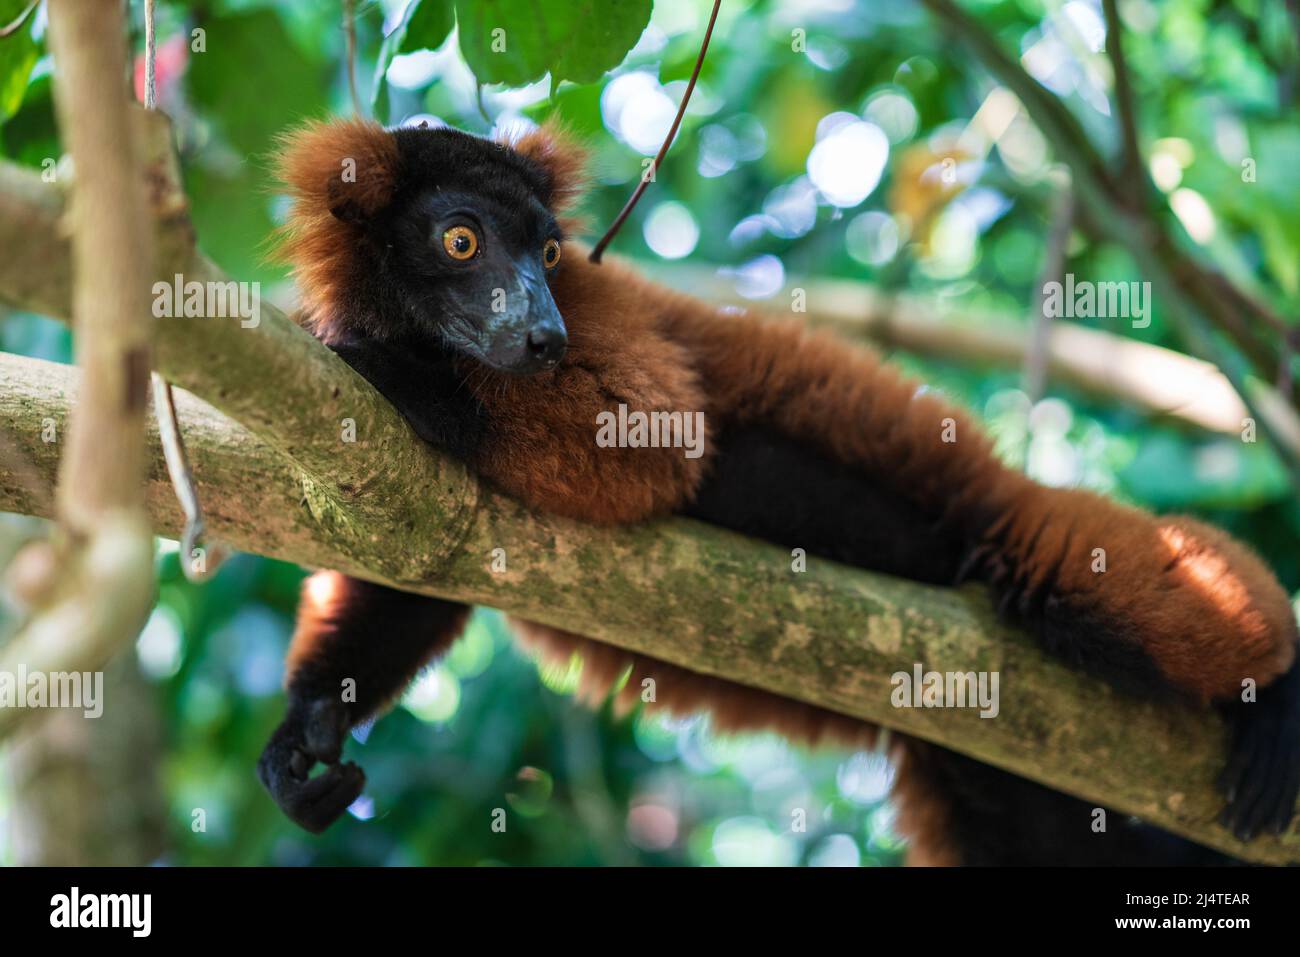 Brown lemur lying on a bench in forest Stock Photo